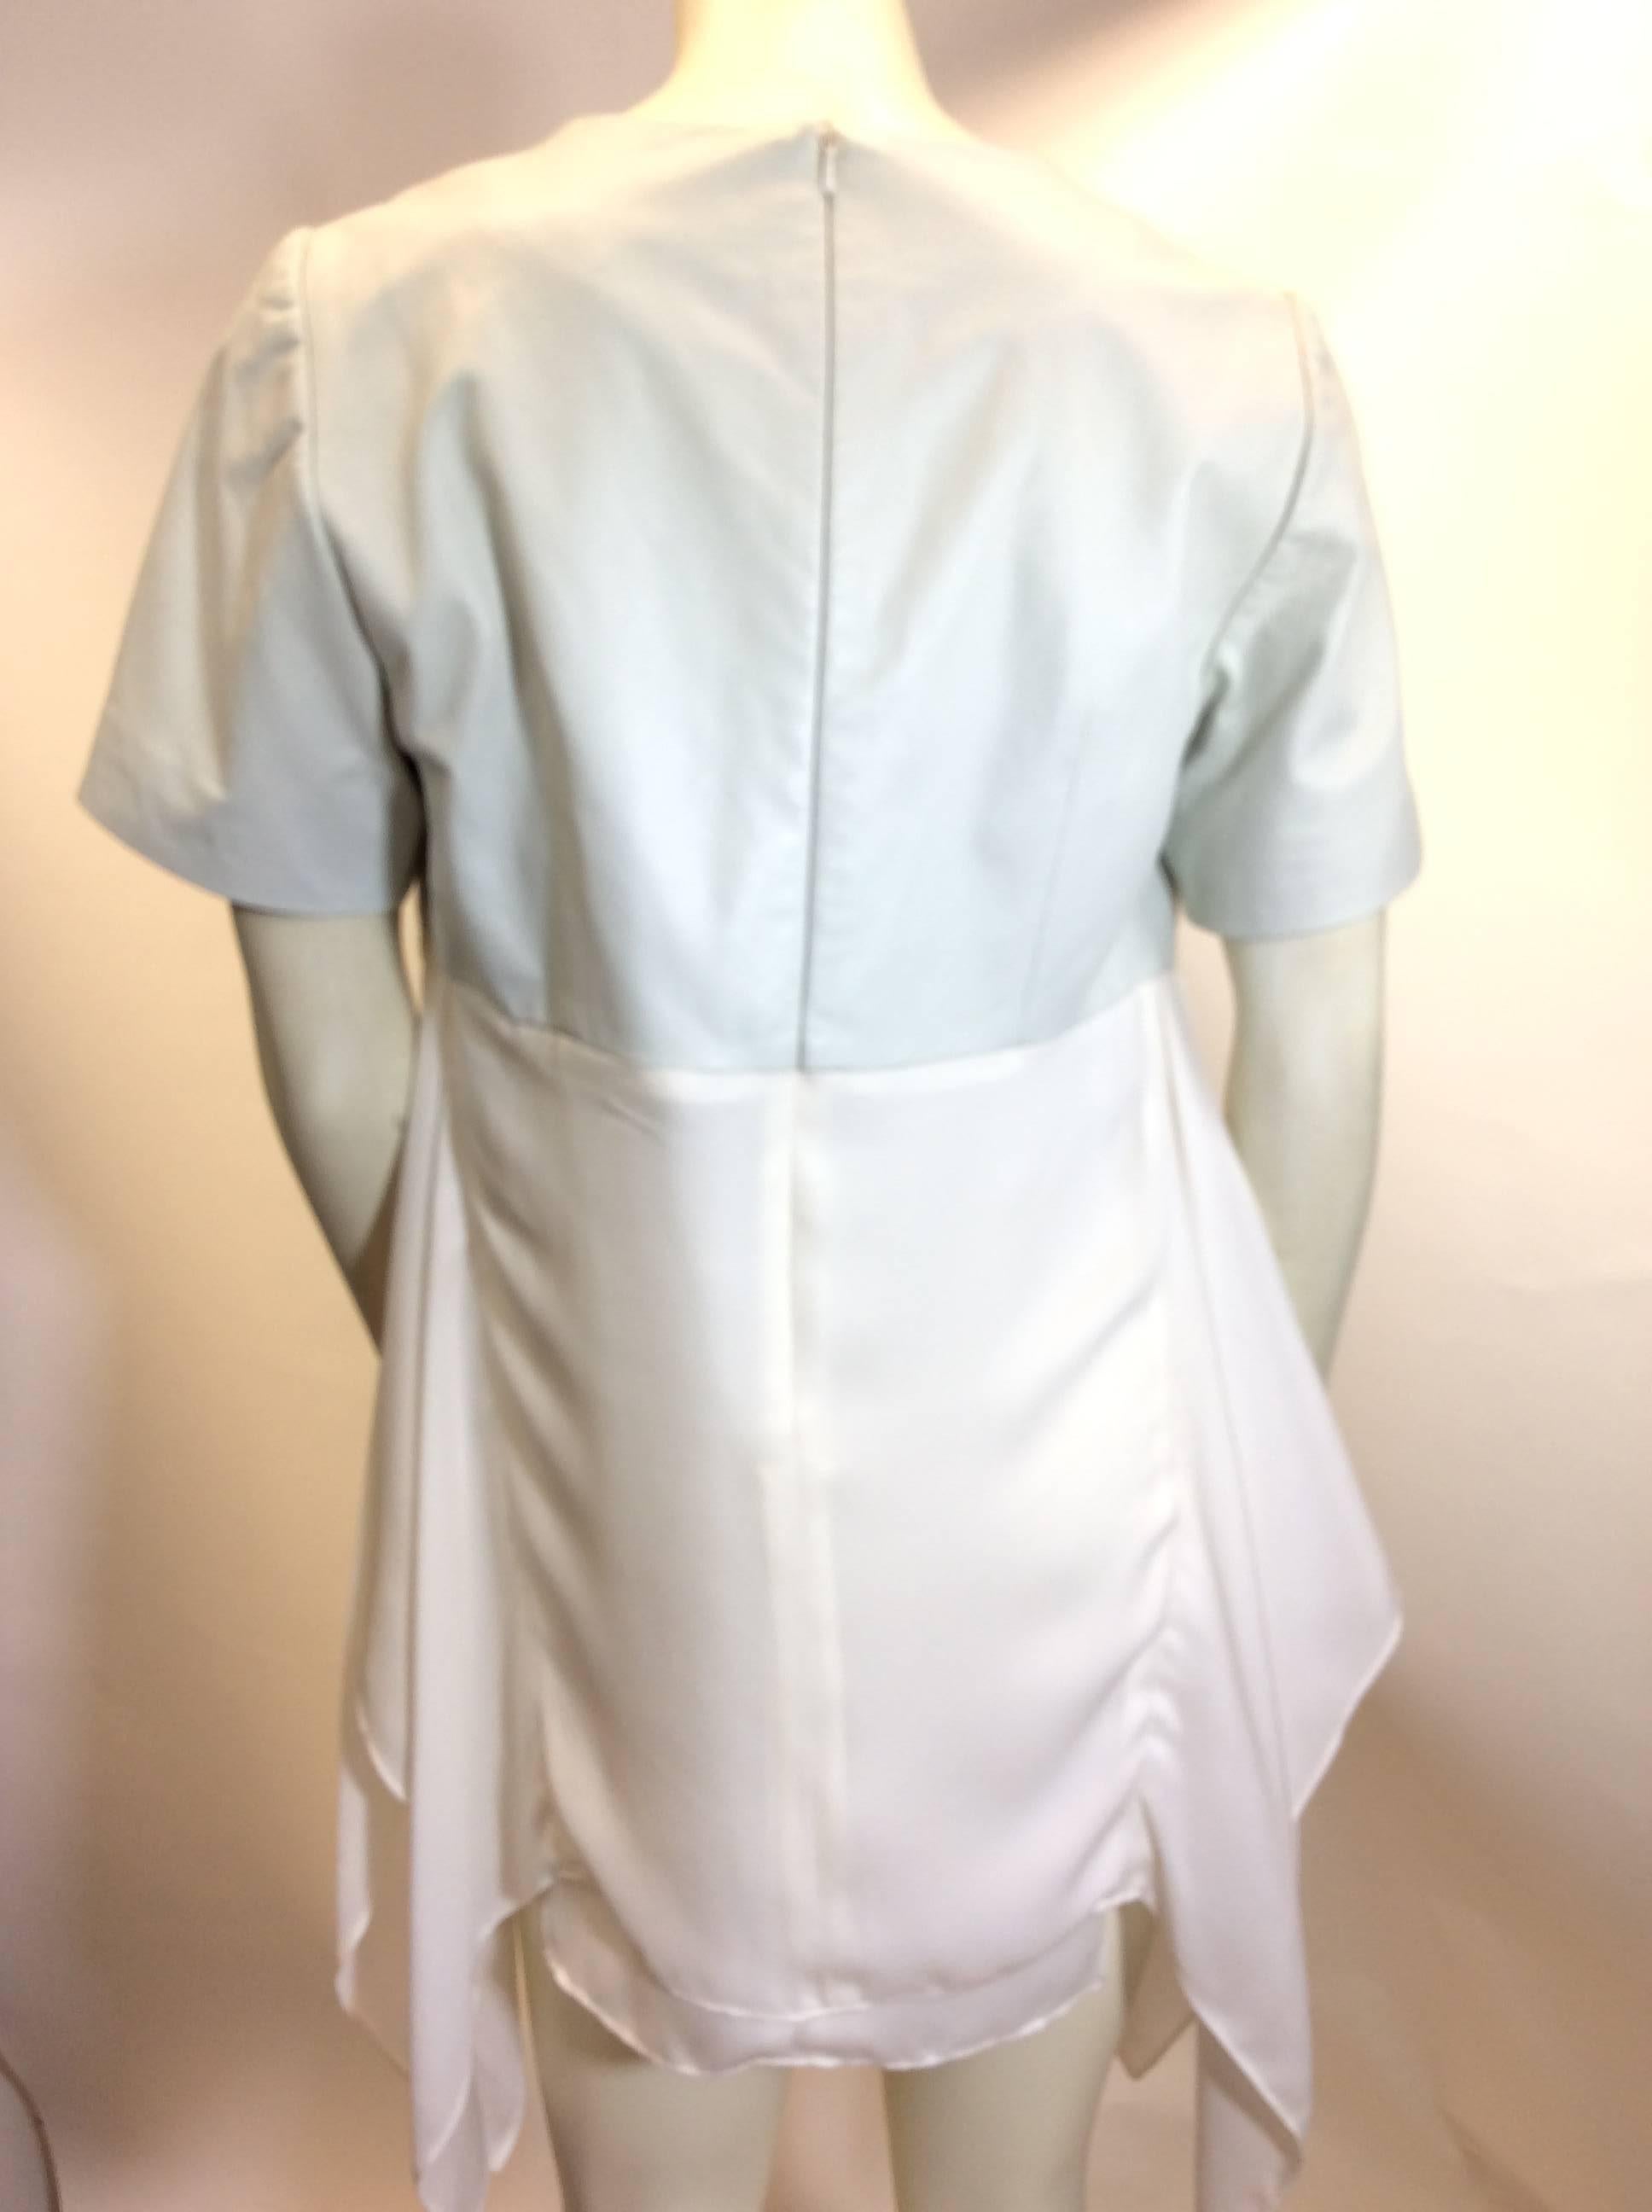 Anveglosa Silk & Leather Blouse In Good Condition For Sale In Narberth, PA